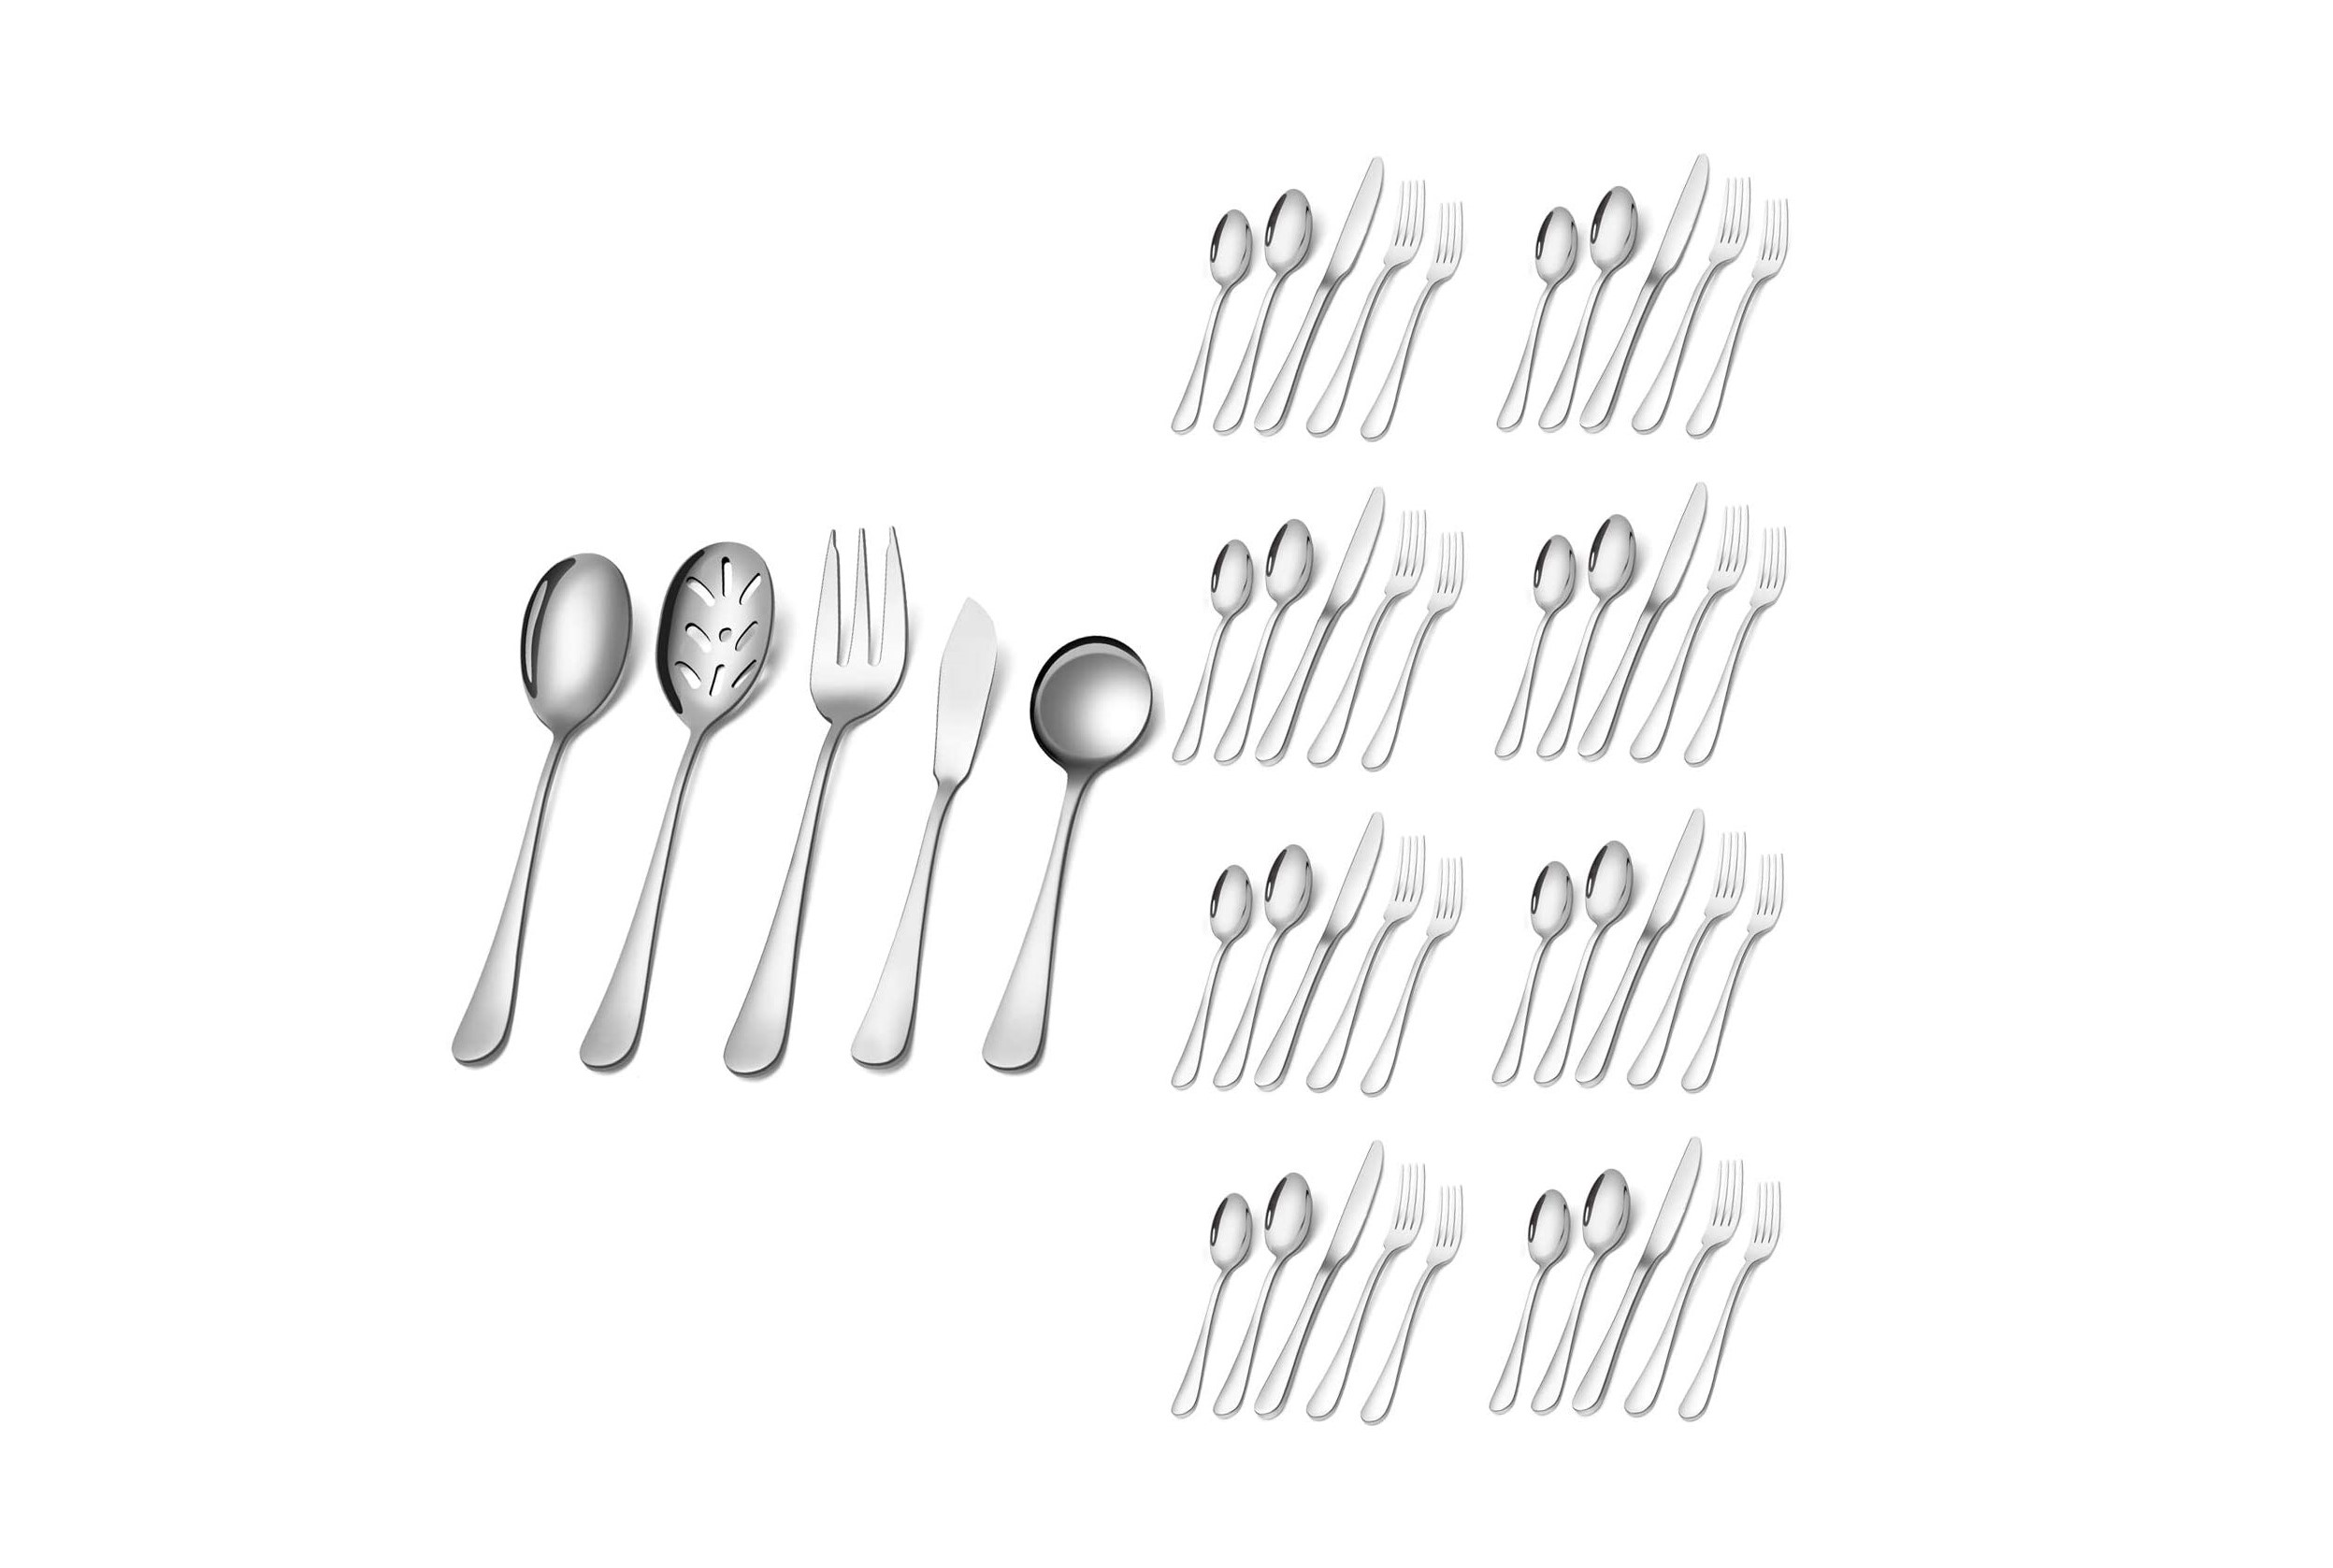 LIANYU Flatware Set Review: Everyday flatware at a bargain price